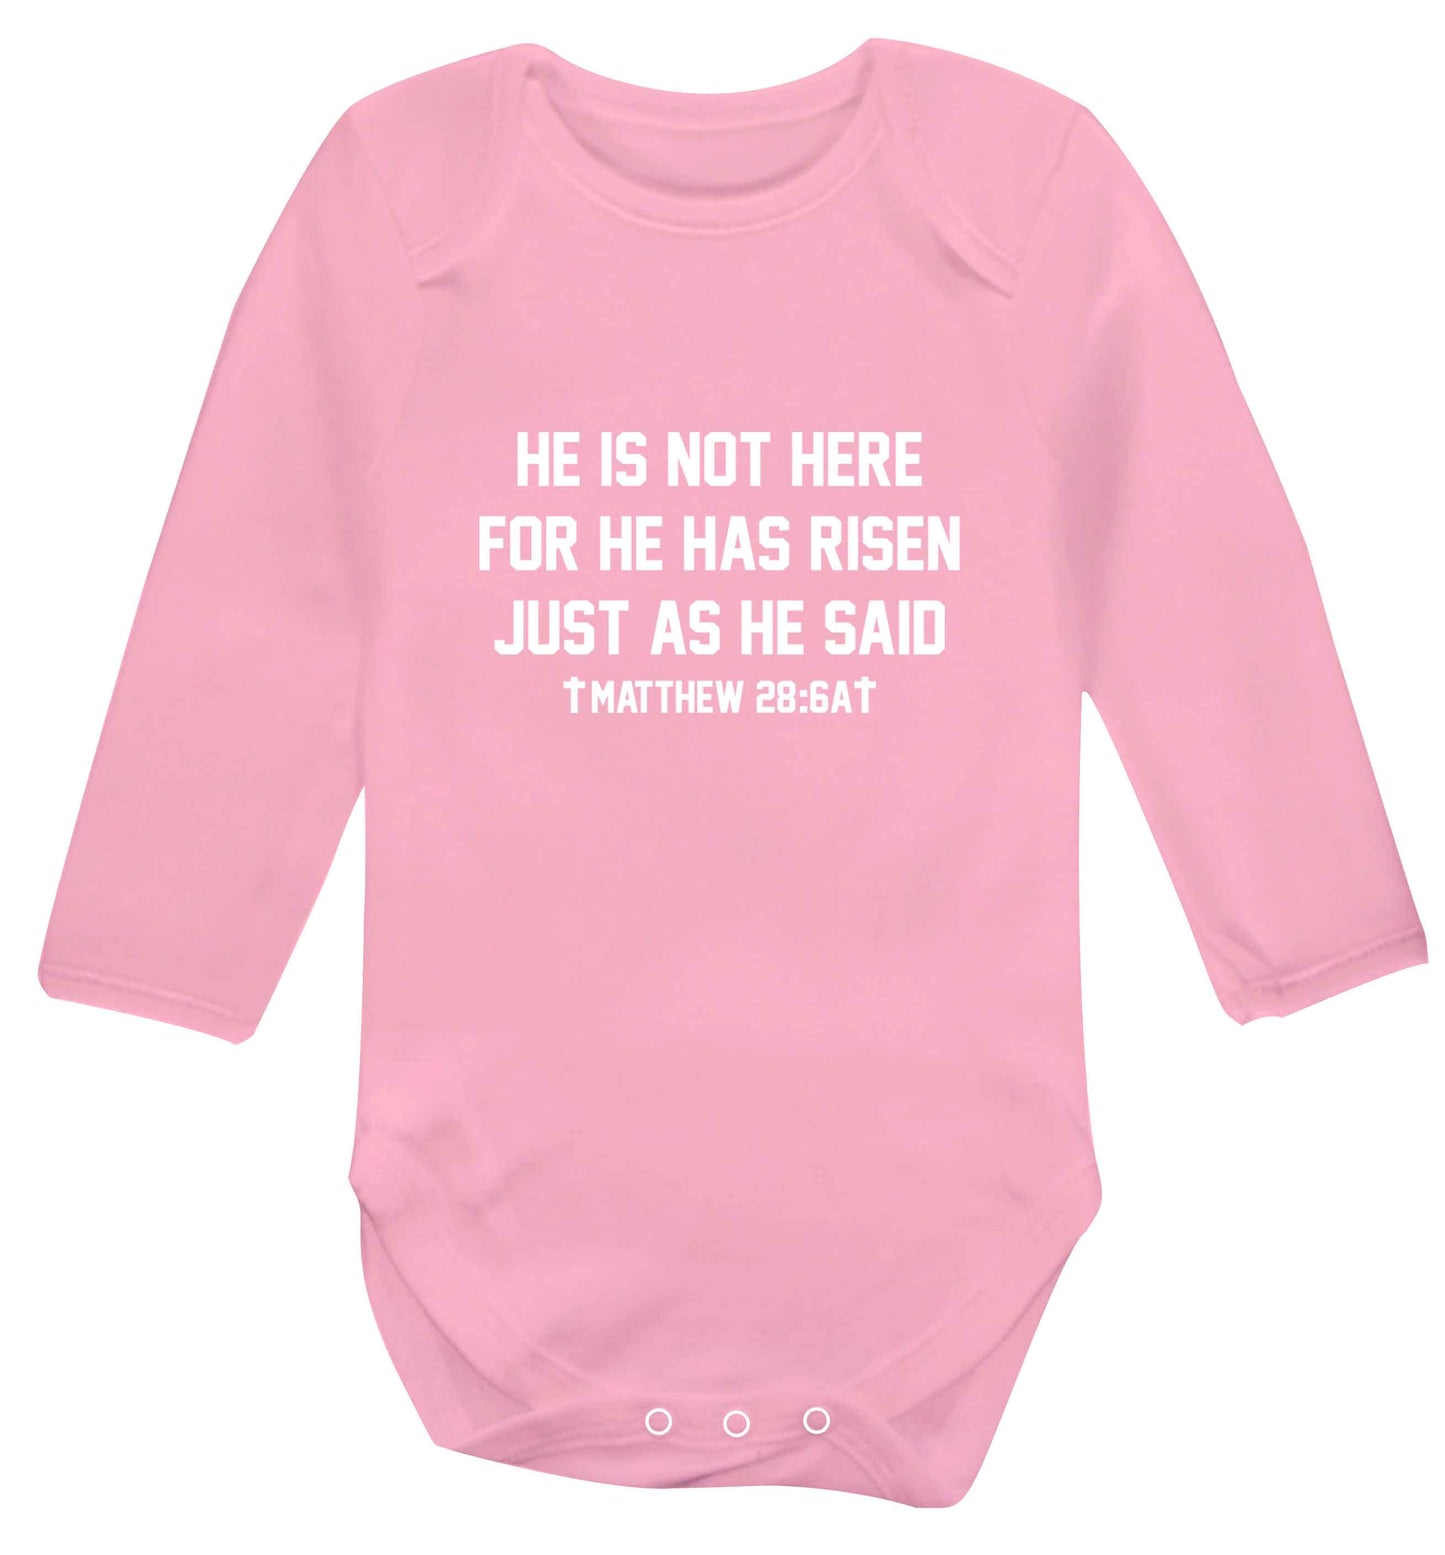 He is not here for he has risen just as he said matthew 28:6A baby vest long sleeved pale pink 6-12 months